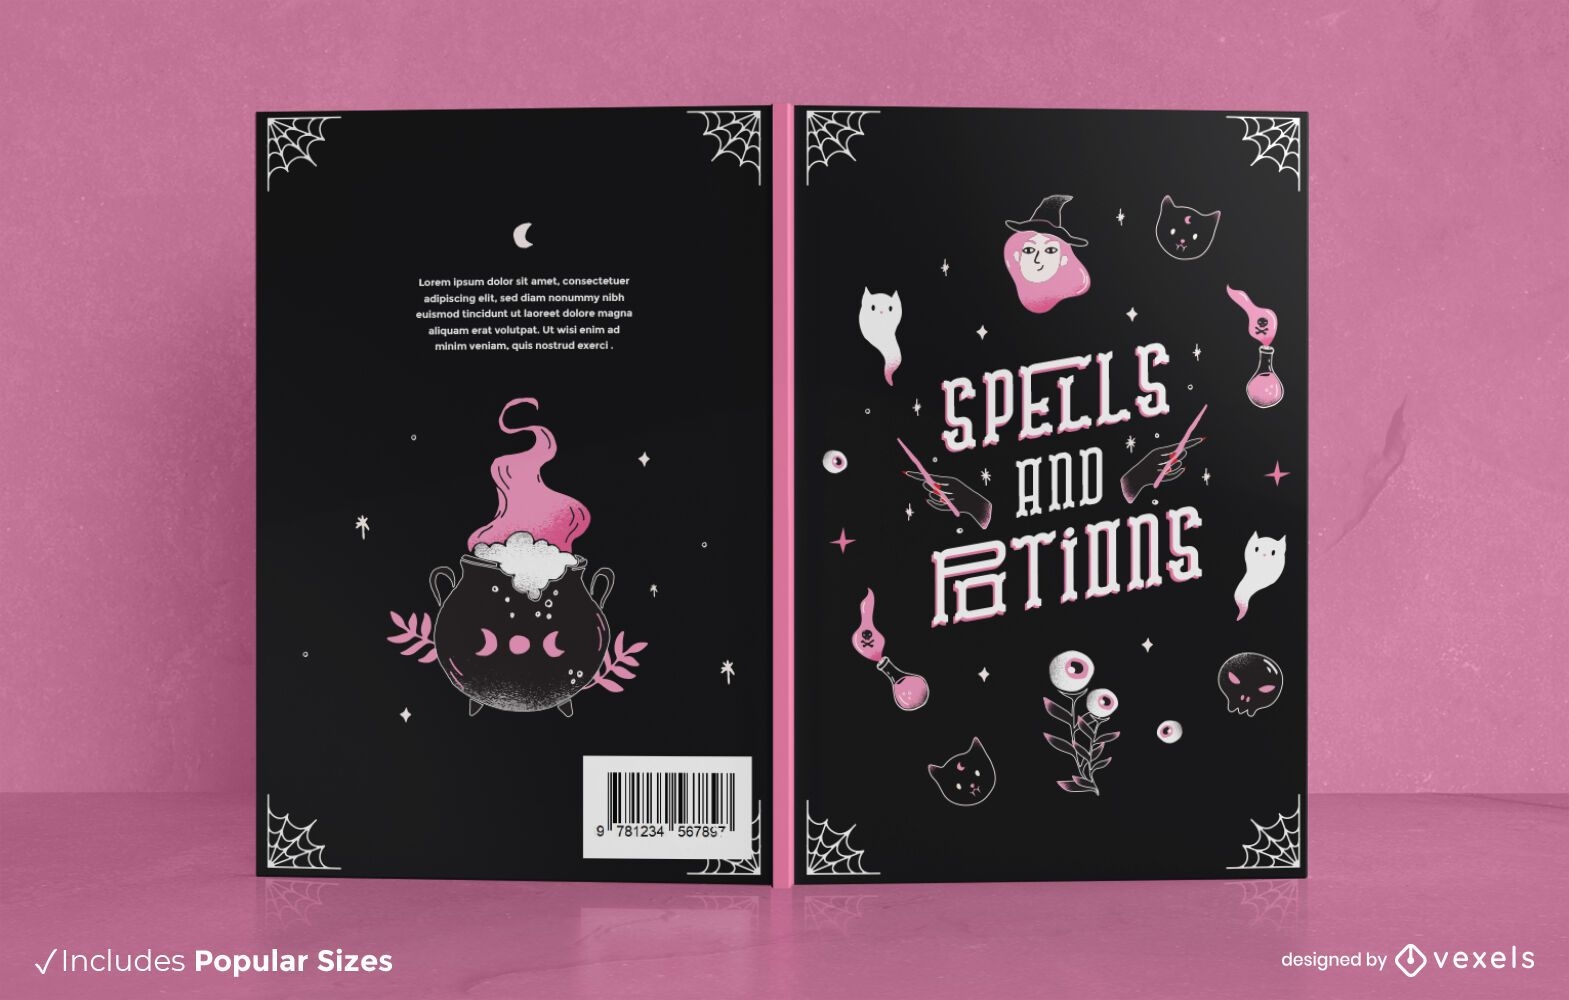 Spells and potions book cover design